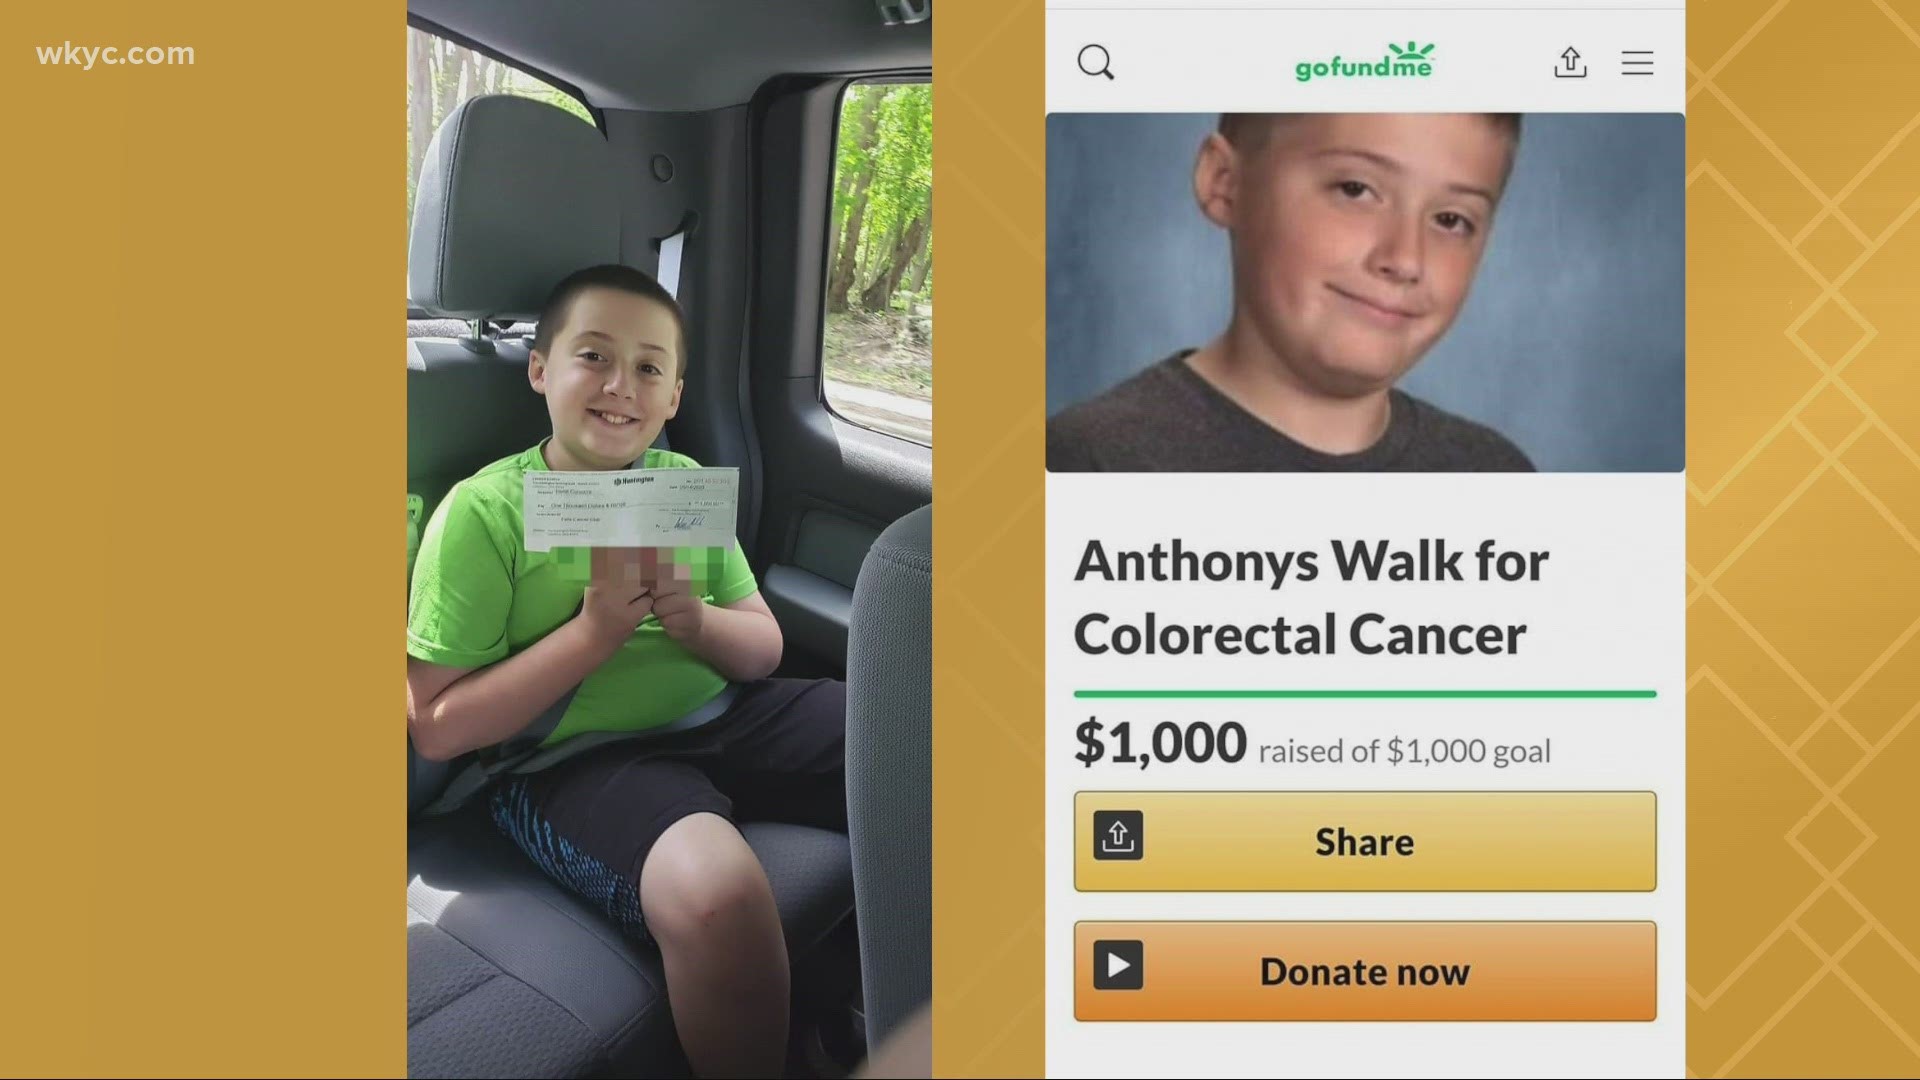 Anthony Cucuzza, of the Ellet area, raised the money for the Falls Cancer Club, an organization that helps pay medical bills for cancer patients in Cuyahoga Falls.